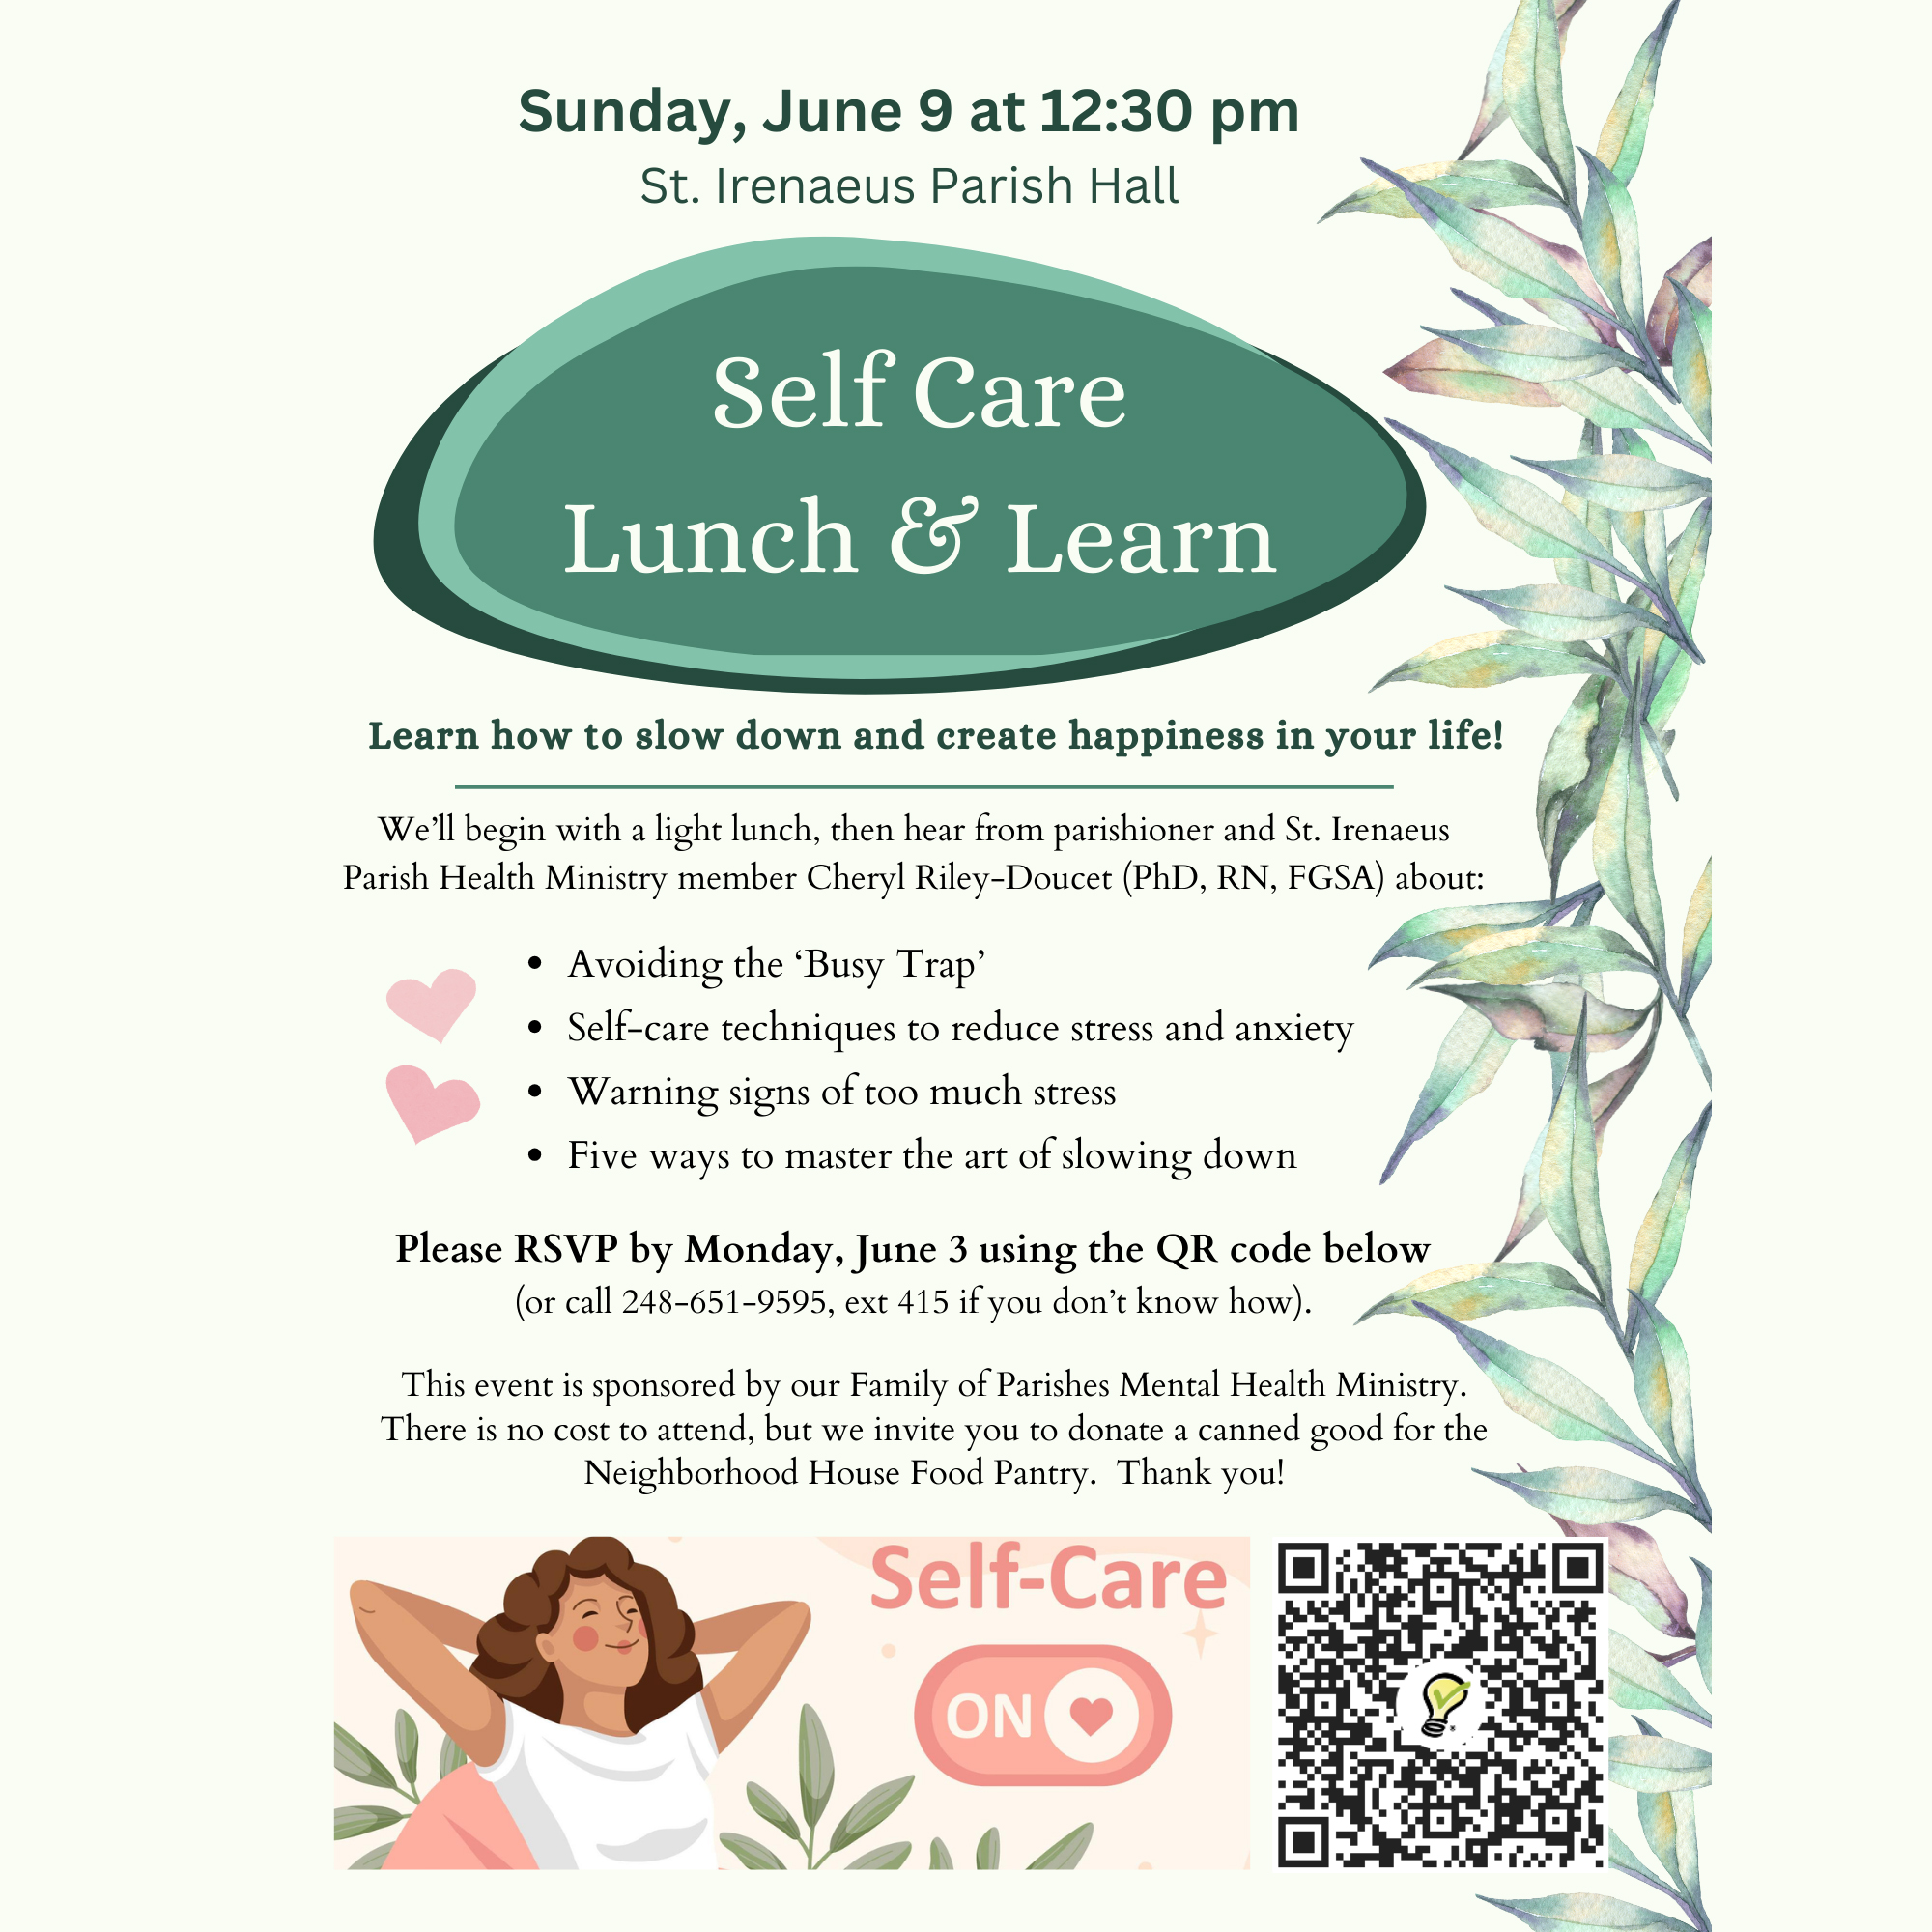 Self-Care Lunch & Learn Event Flyer